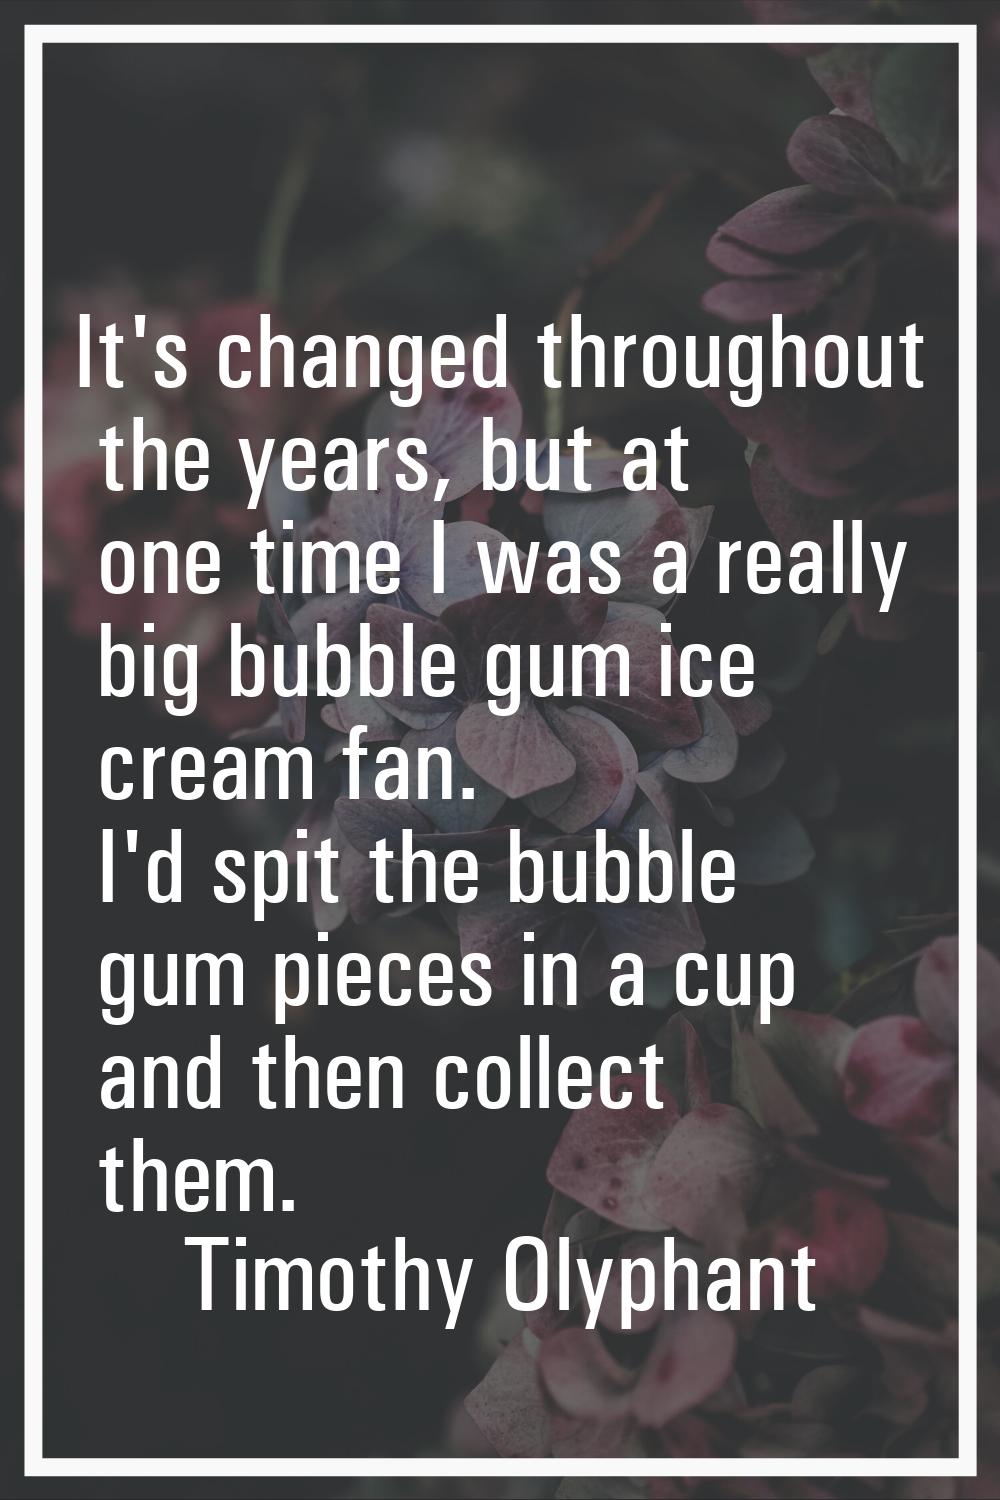 It's changed throughout the years, but at one time I was a really big bubble gum ice cream fan. I'd